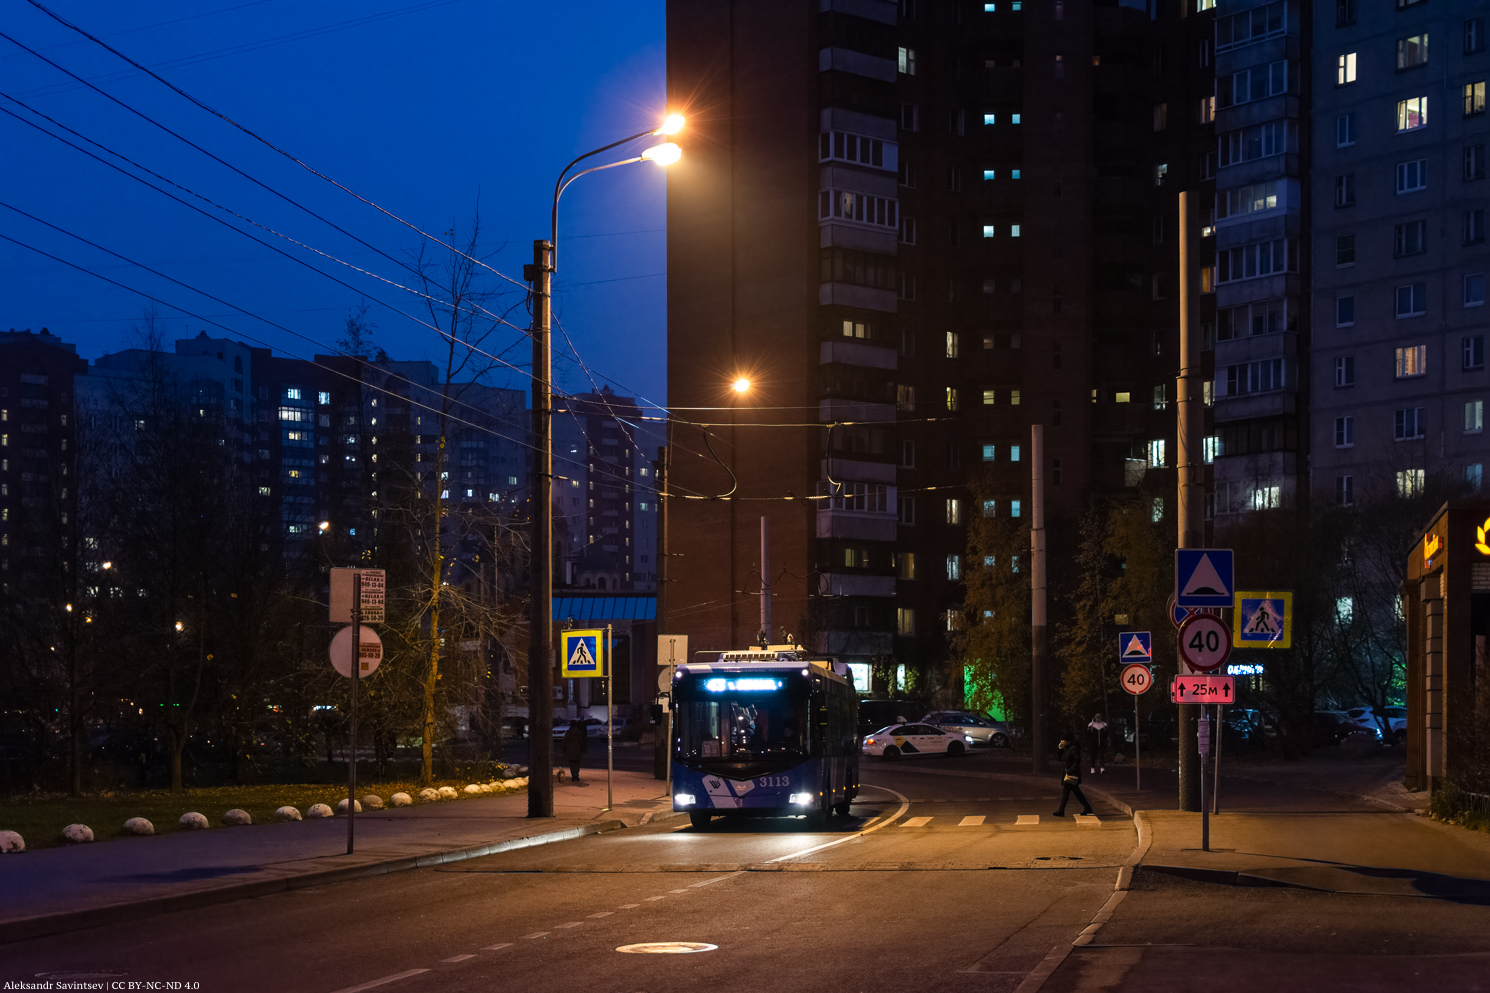 St Petersburg — Trolleybus lines and infrastructure